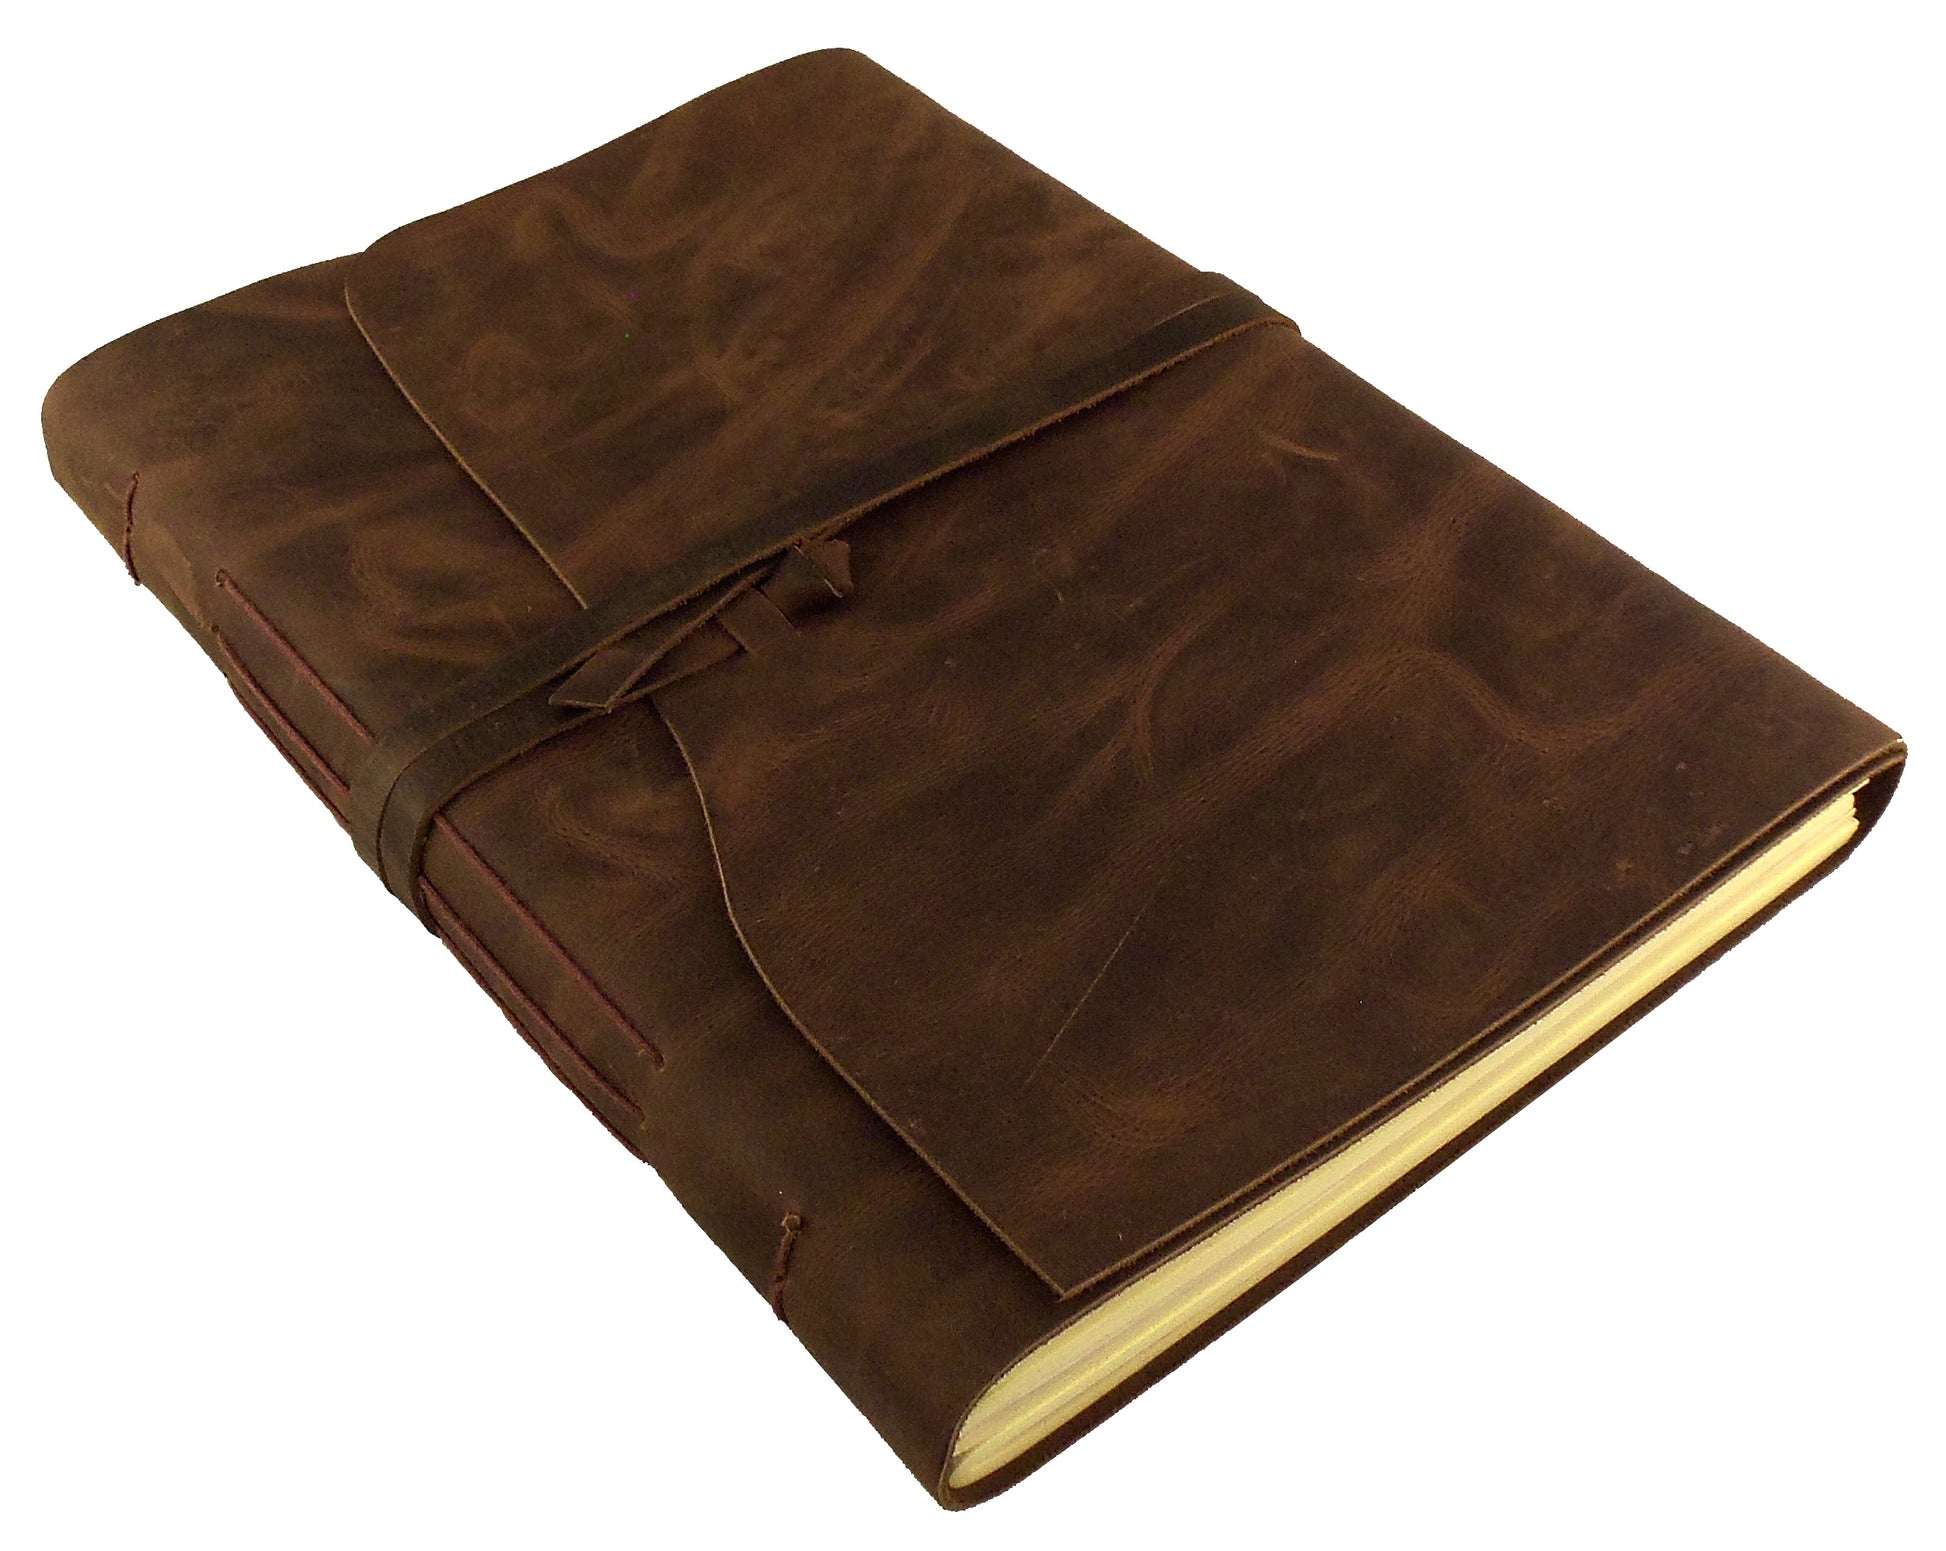 Large Genuine Leather Journal/Sketchbook with Gift Box - 380 Pages